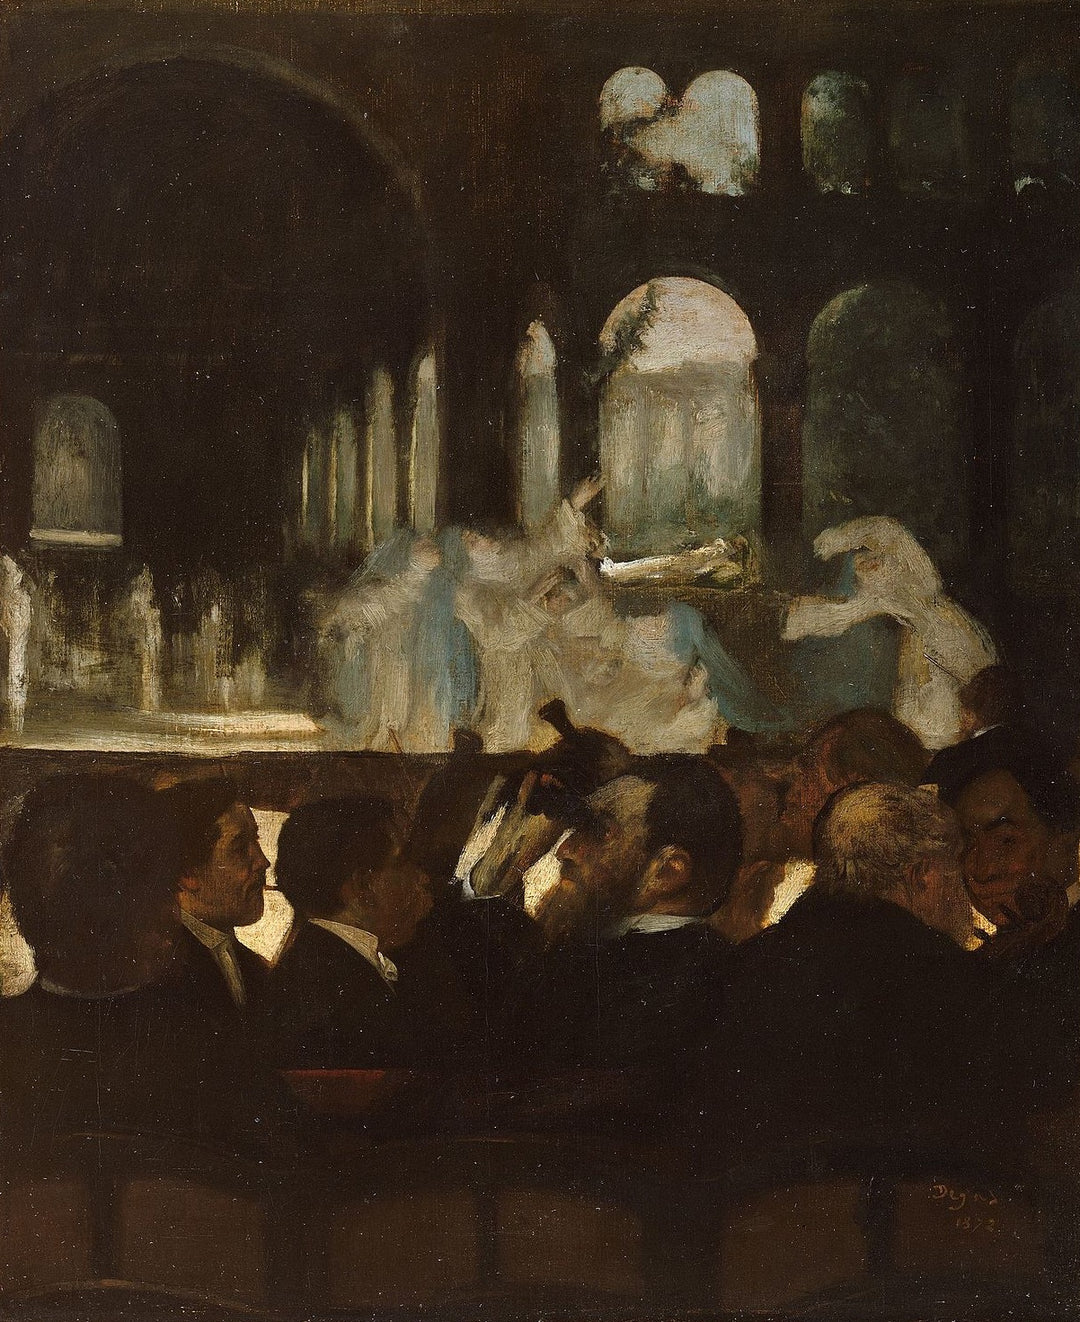 Ballet of the Nuns Painting by Edgar Degas Reproduction Oil on Canvas